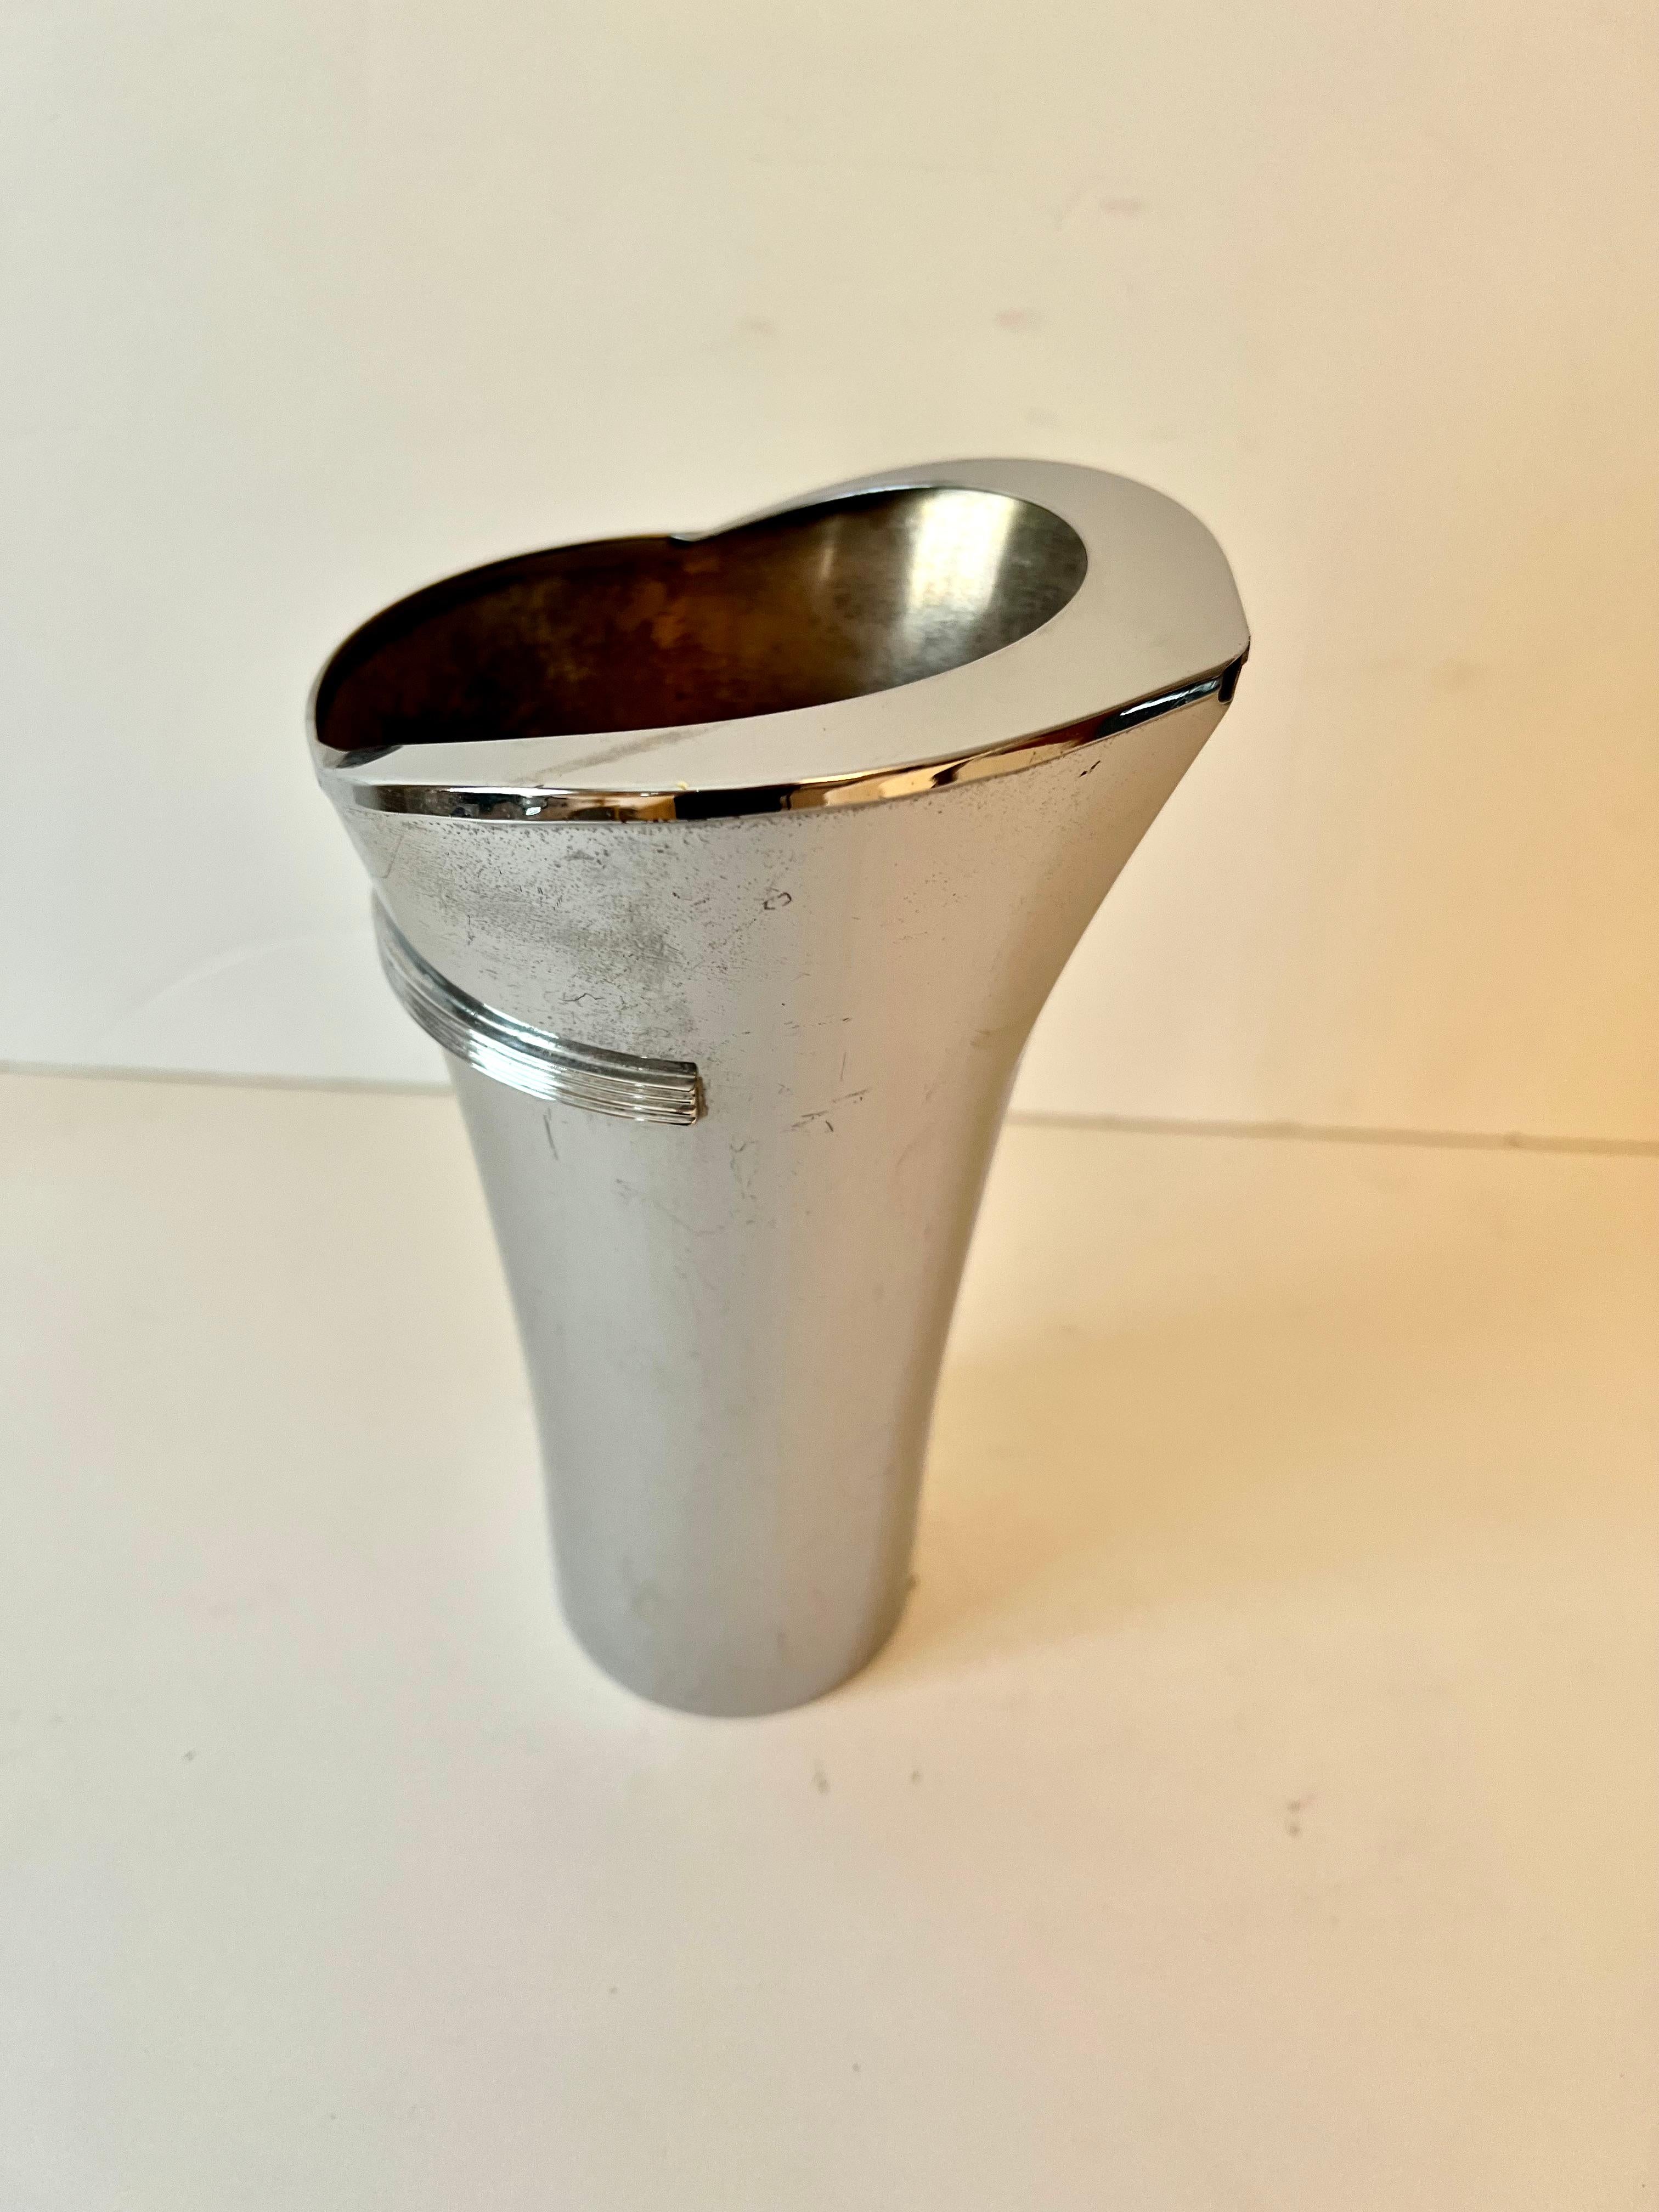 A Stainless Steel Cocktail pourer.  The piece has a uniquely designed head that comes to a point and the addition of several decorative lines / ribs, making it easier to hold and also give it an art deco flavor.

The mid century piece is in